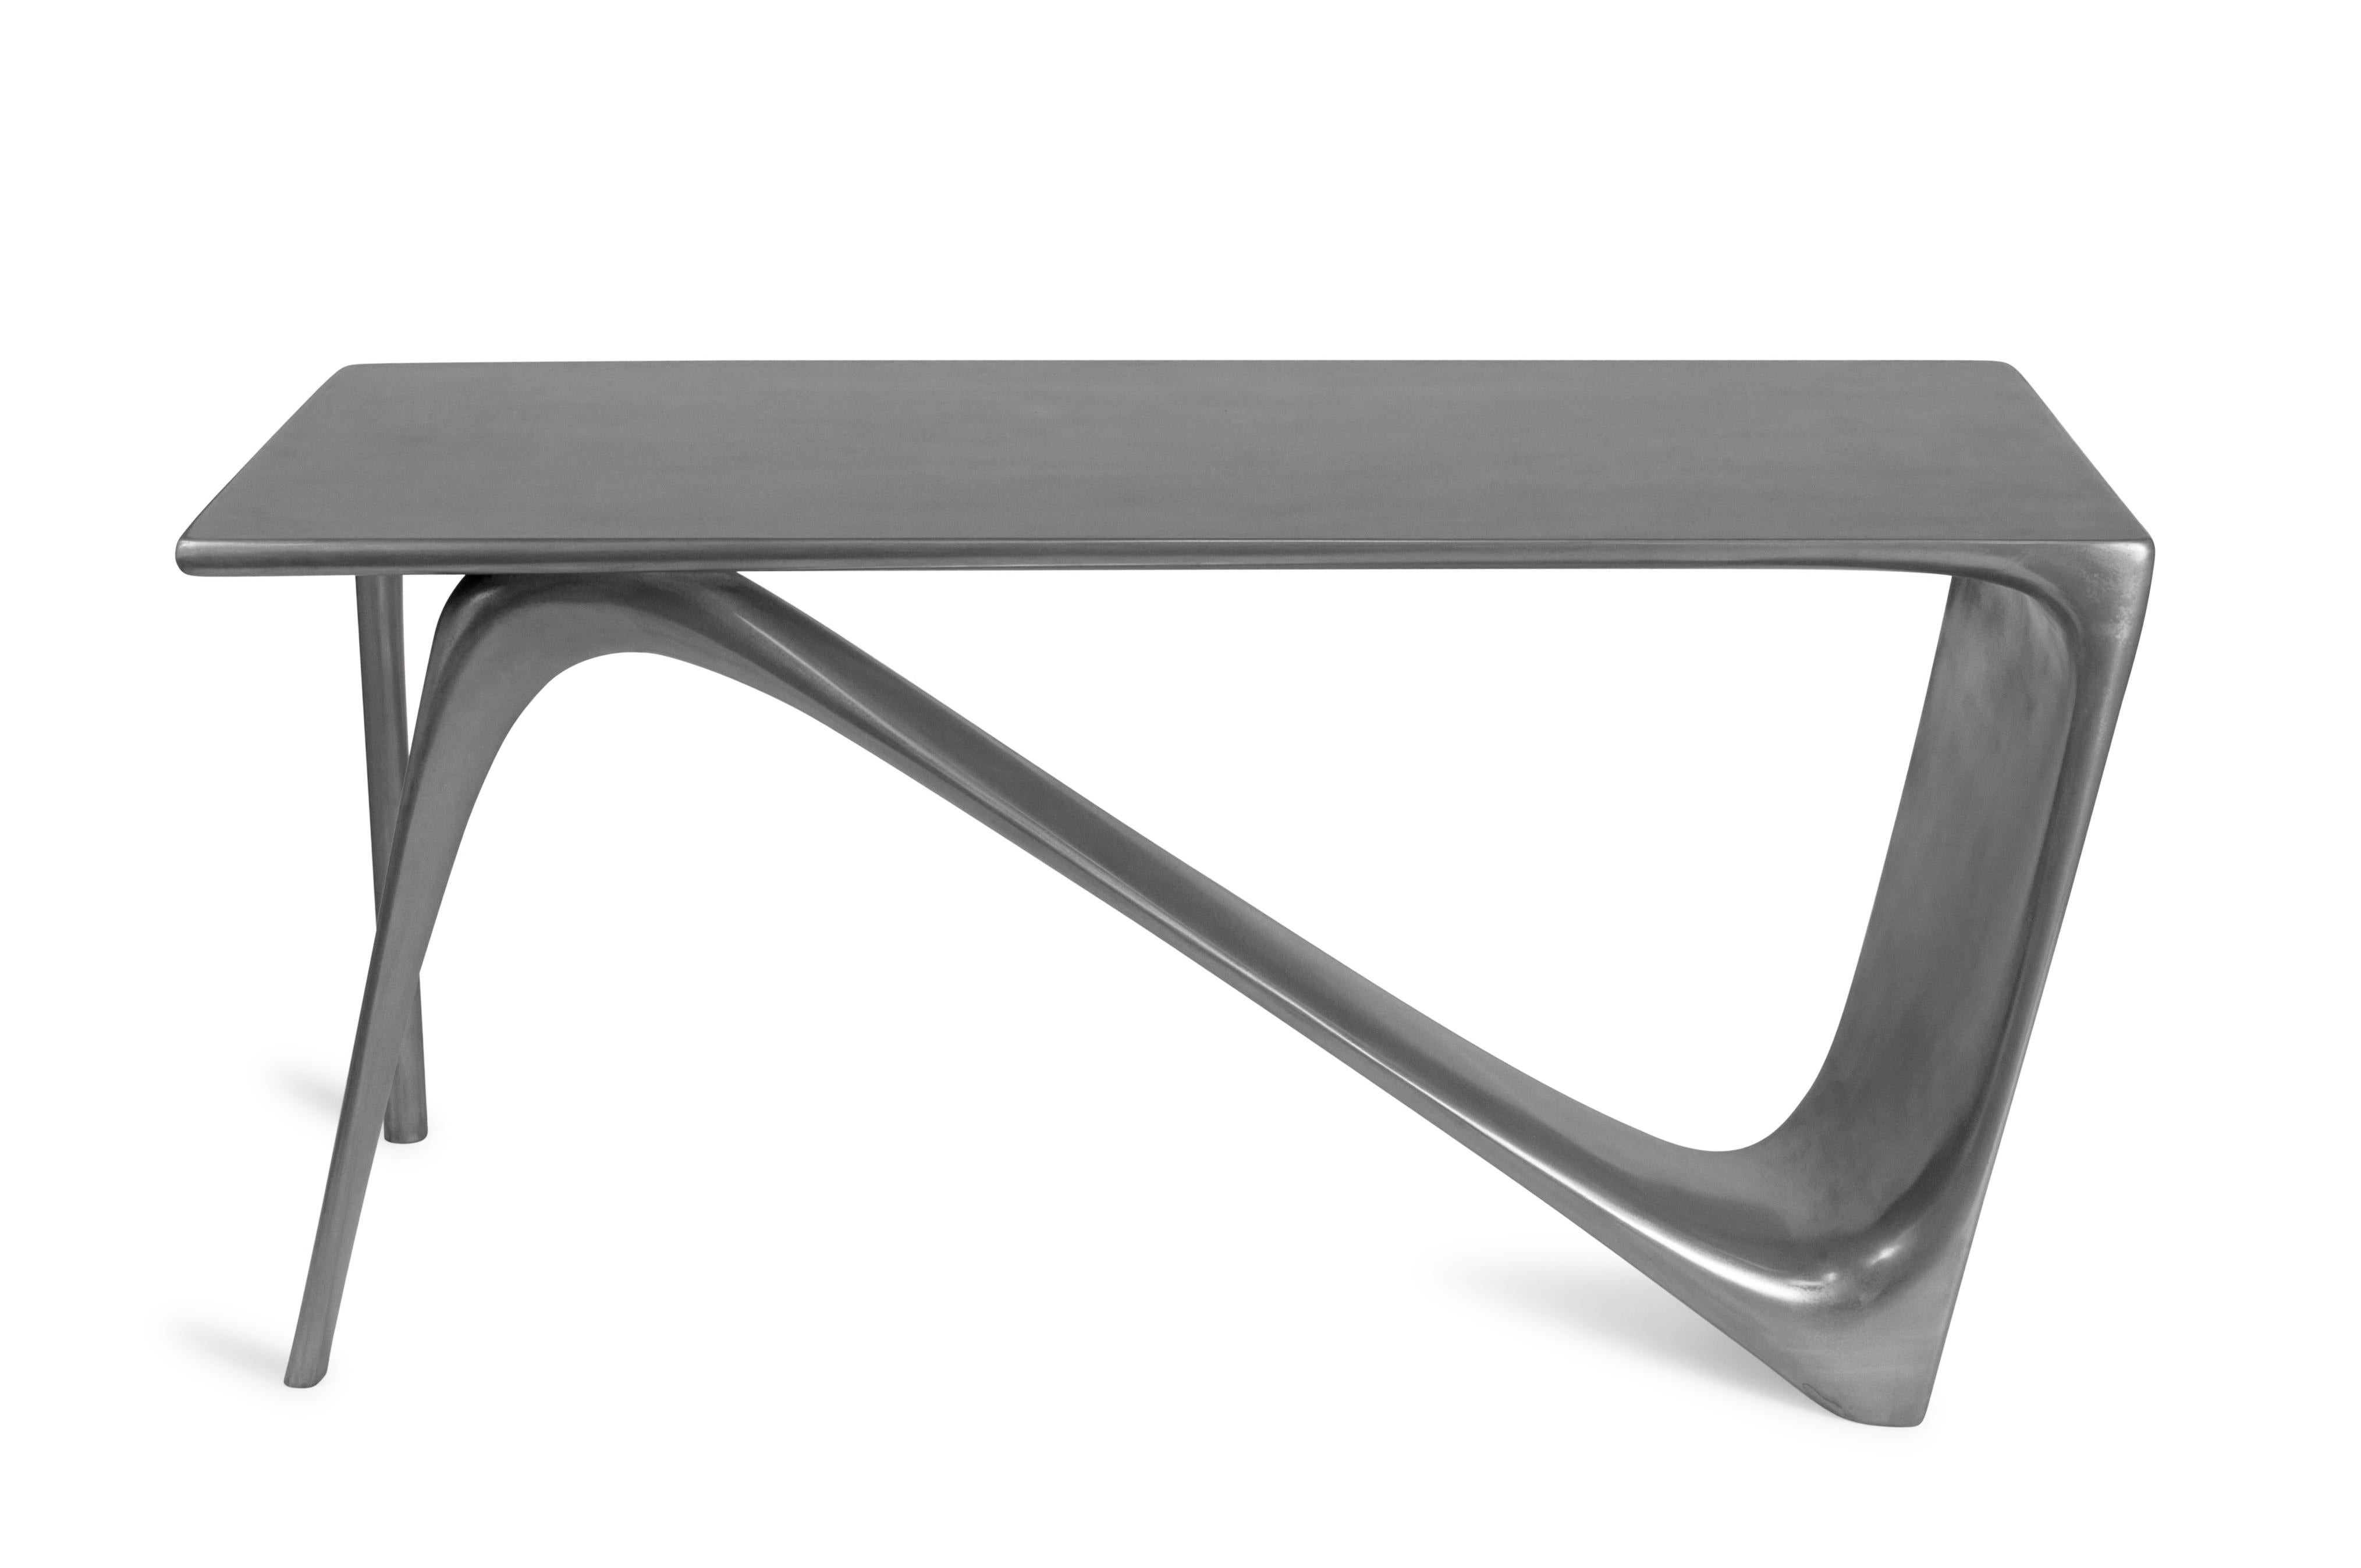 Carved Amorph Astra Desk in Stainless steel lacquer finish 